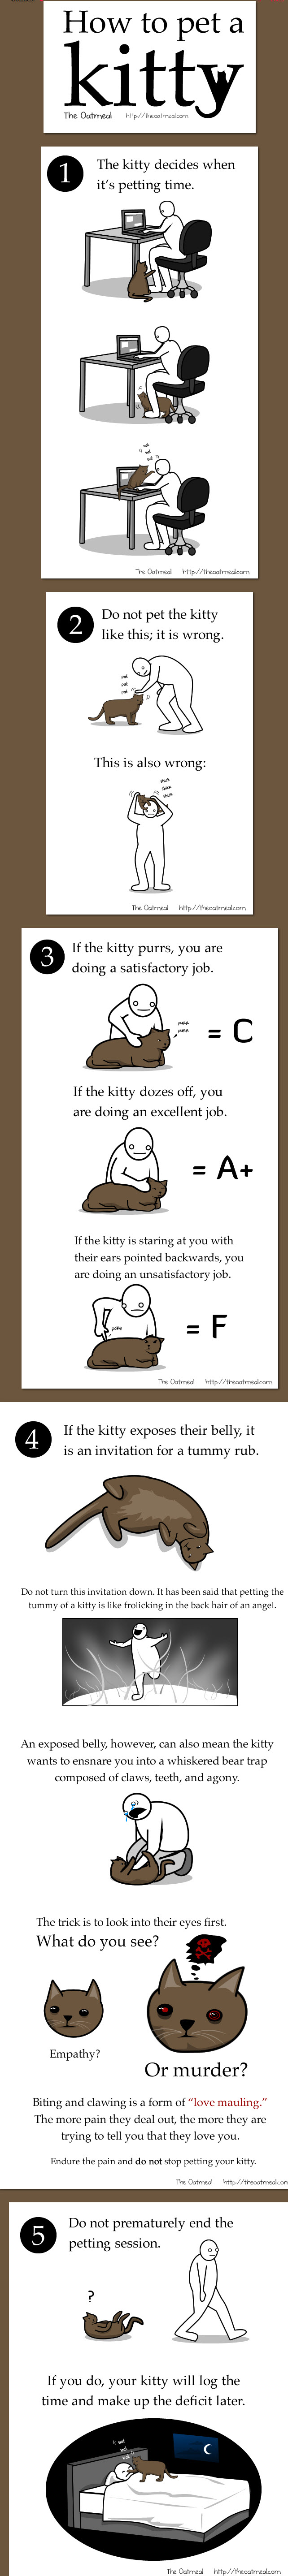 How to pet a kitty by Matthew Inman of the Oatmeal, funny cat comic